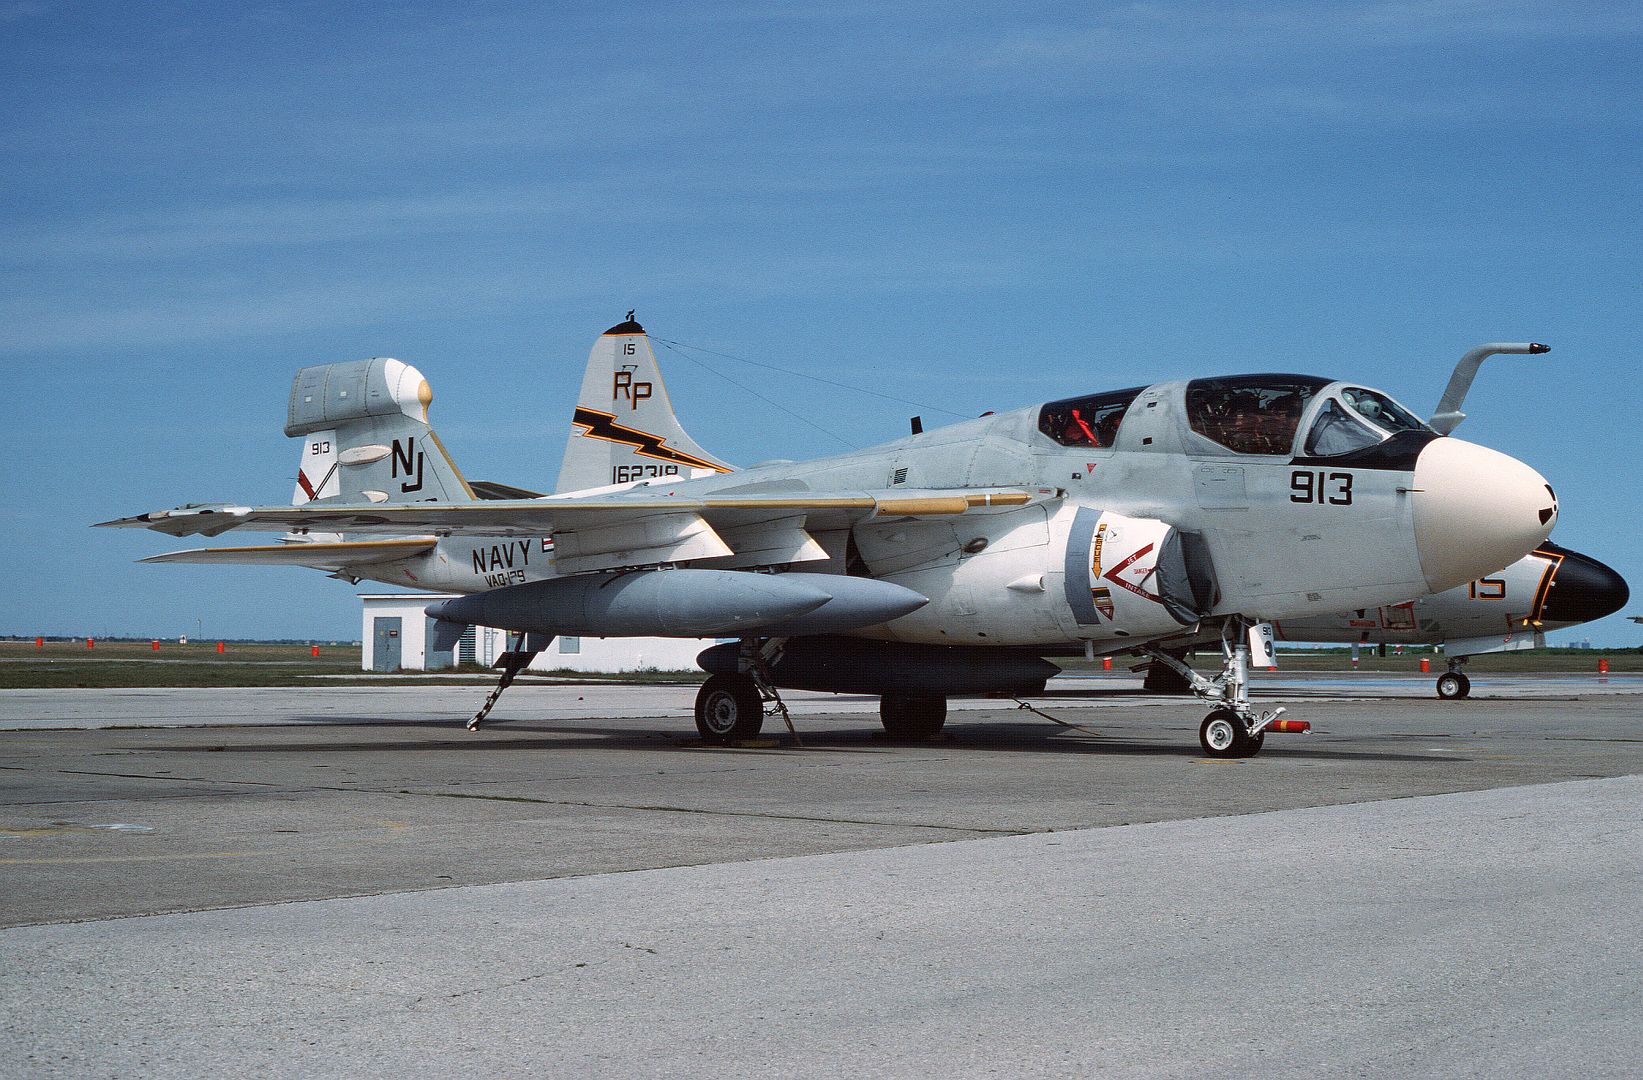 6B Prowler Aircraft Parked On The Flight Line